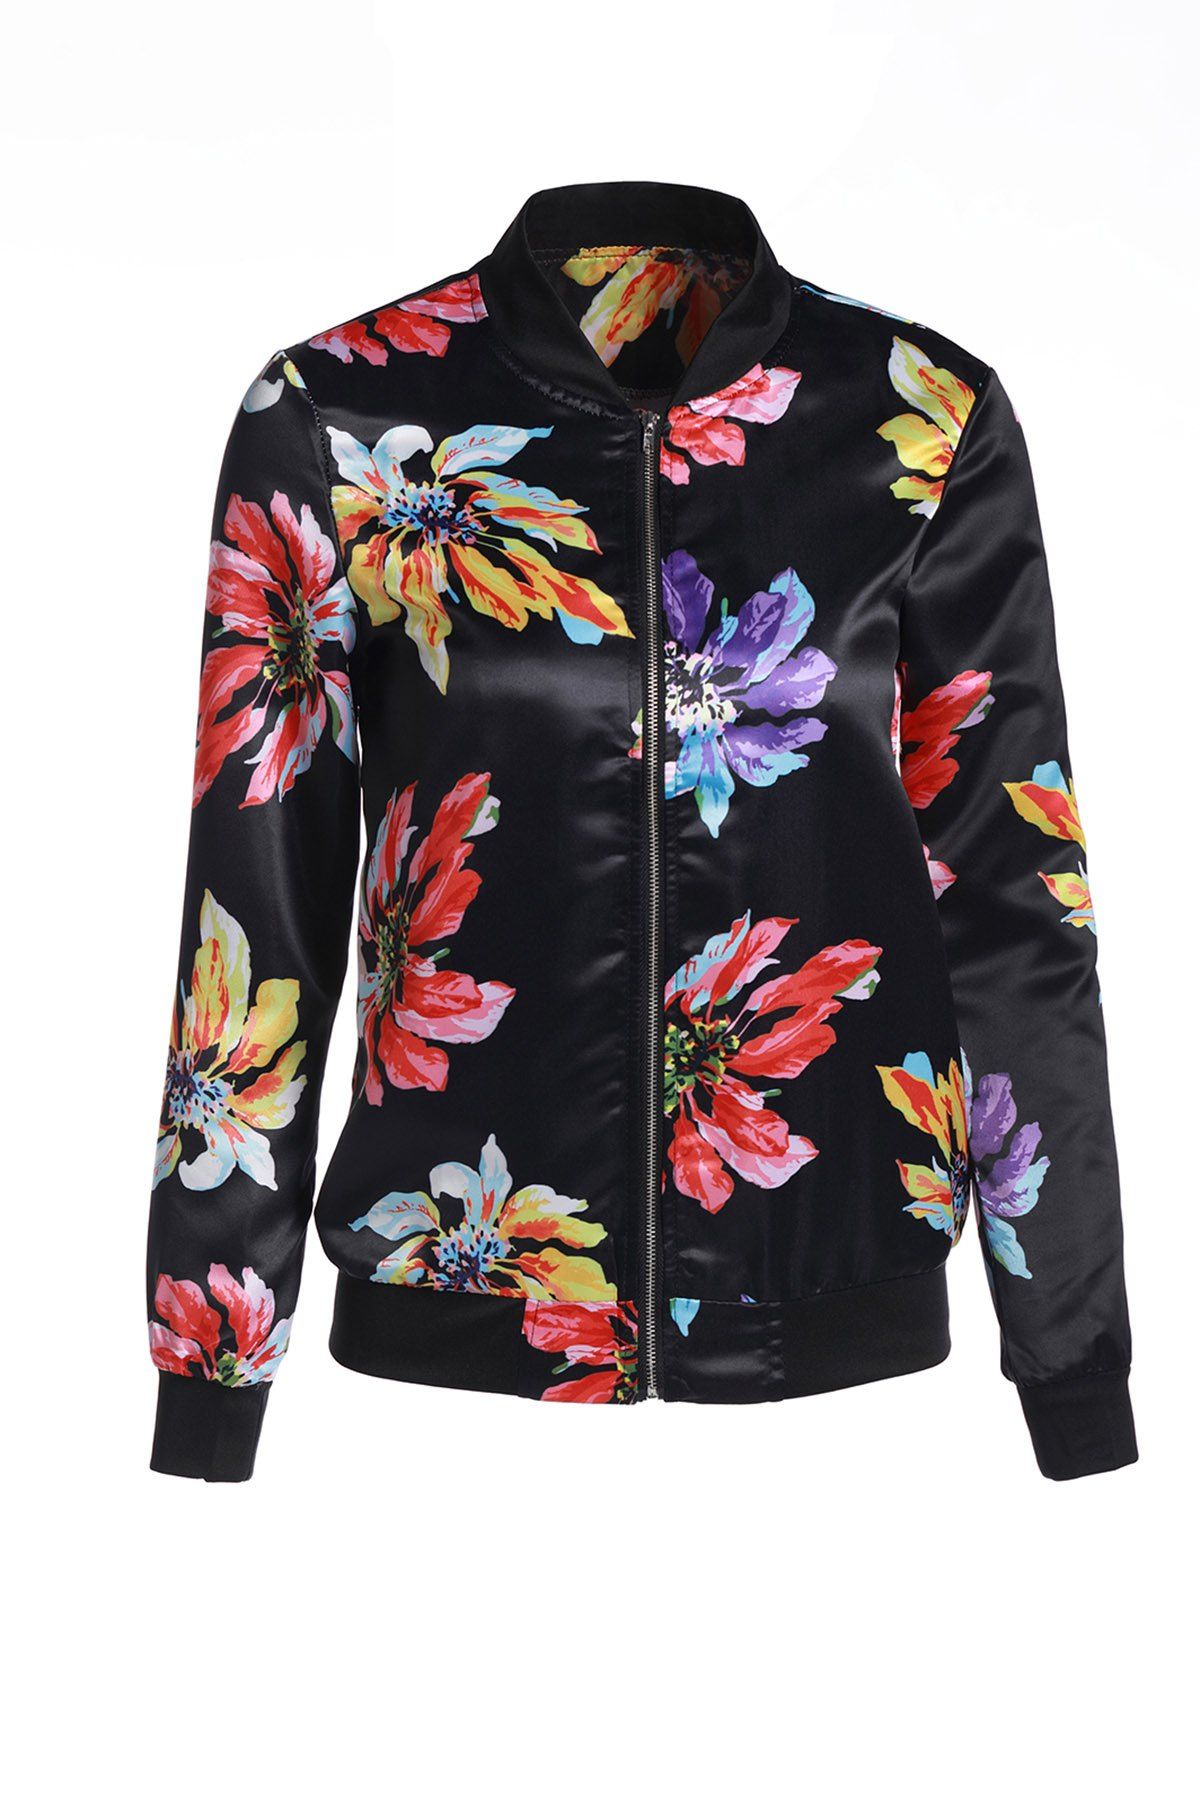 [17% OFF] 2020 Stylish Floral Printed Scoop Neck Jacket For Women In ...